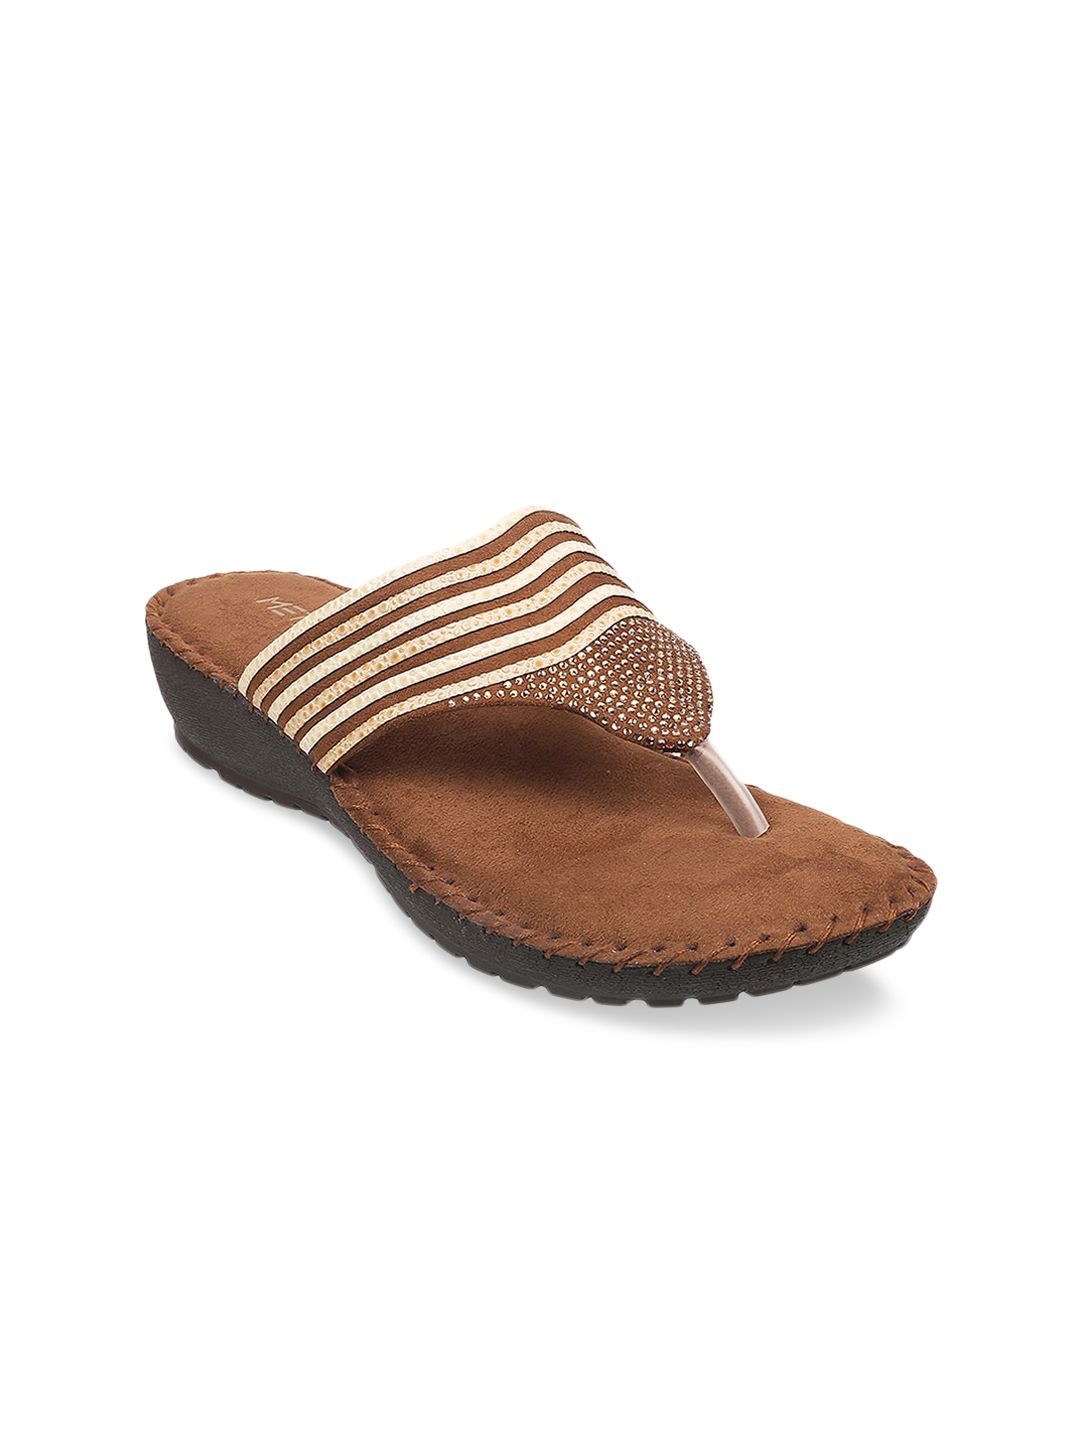 Metro Women Brown Embellished T-Strap Flats Price in India